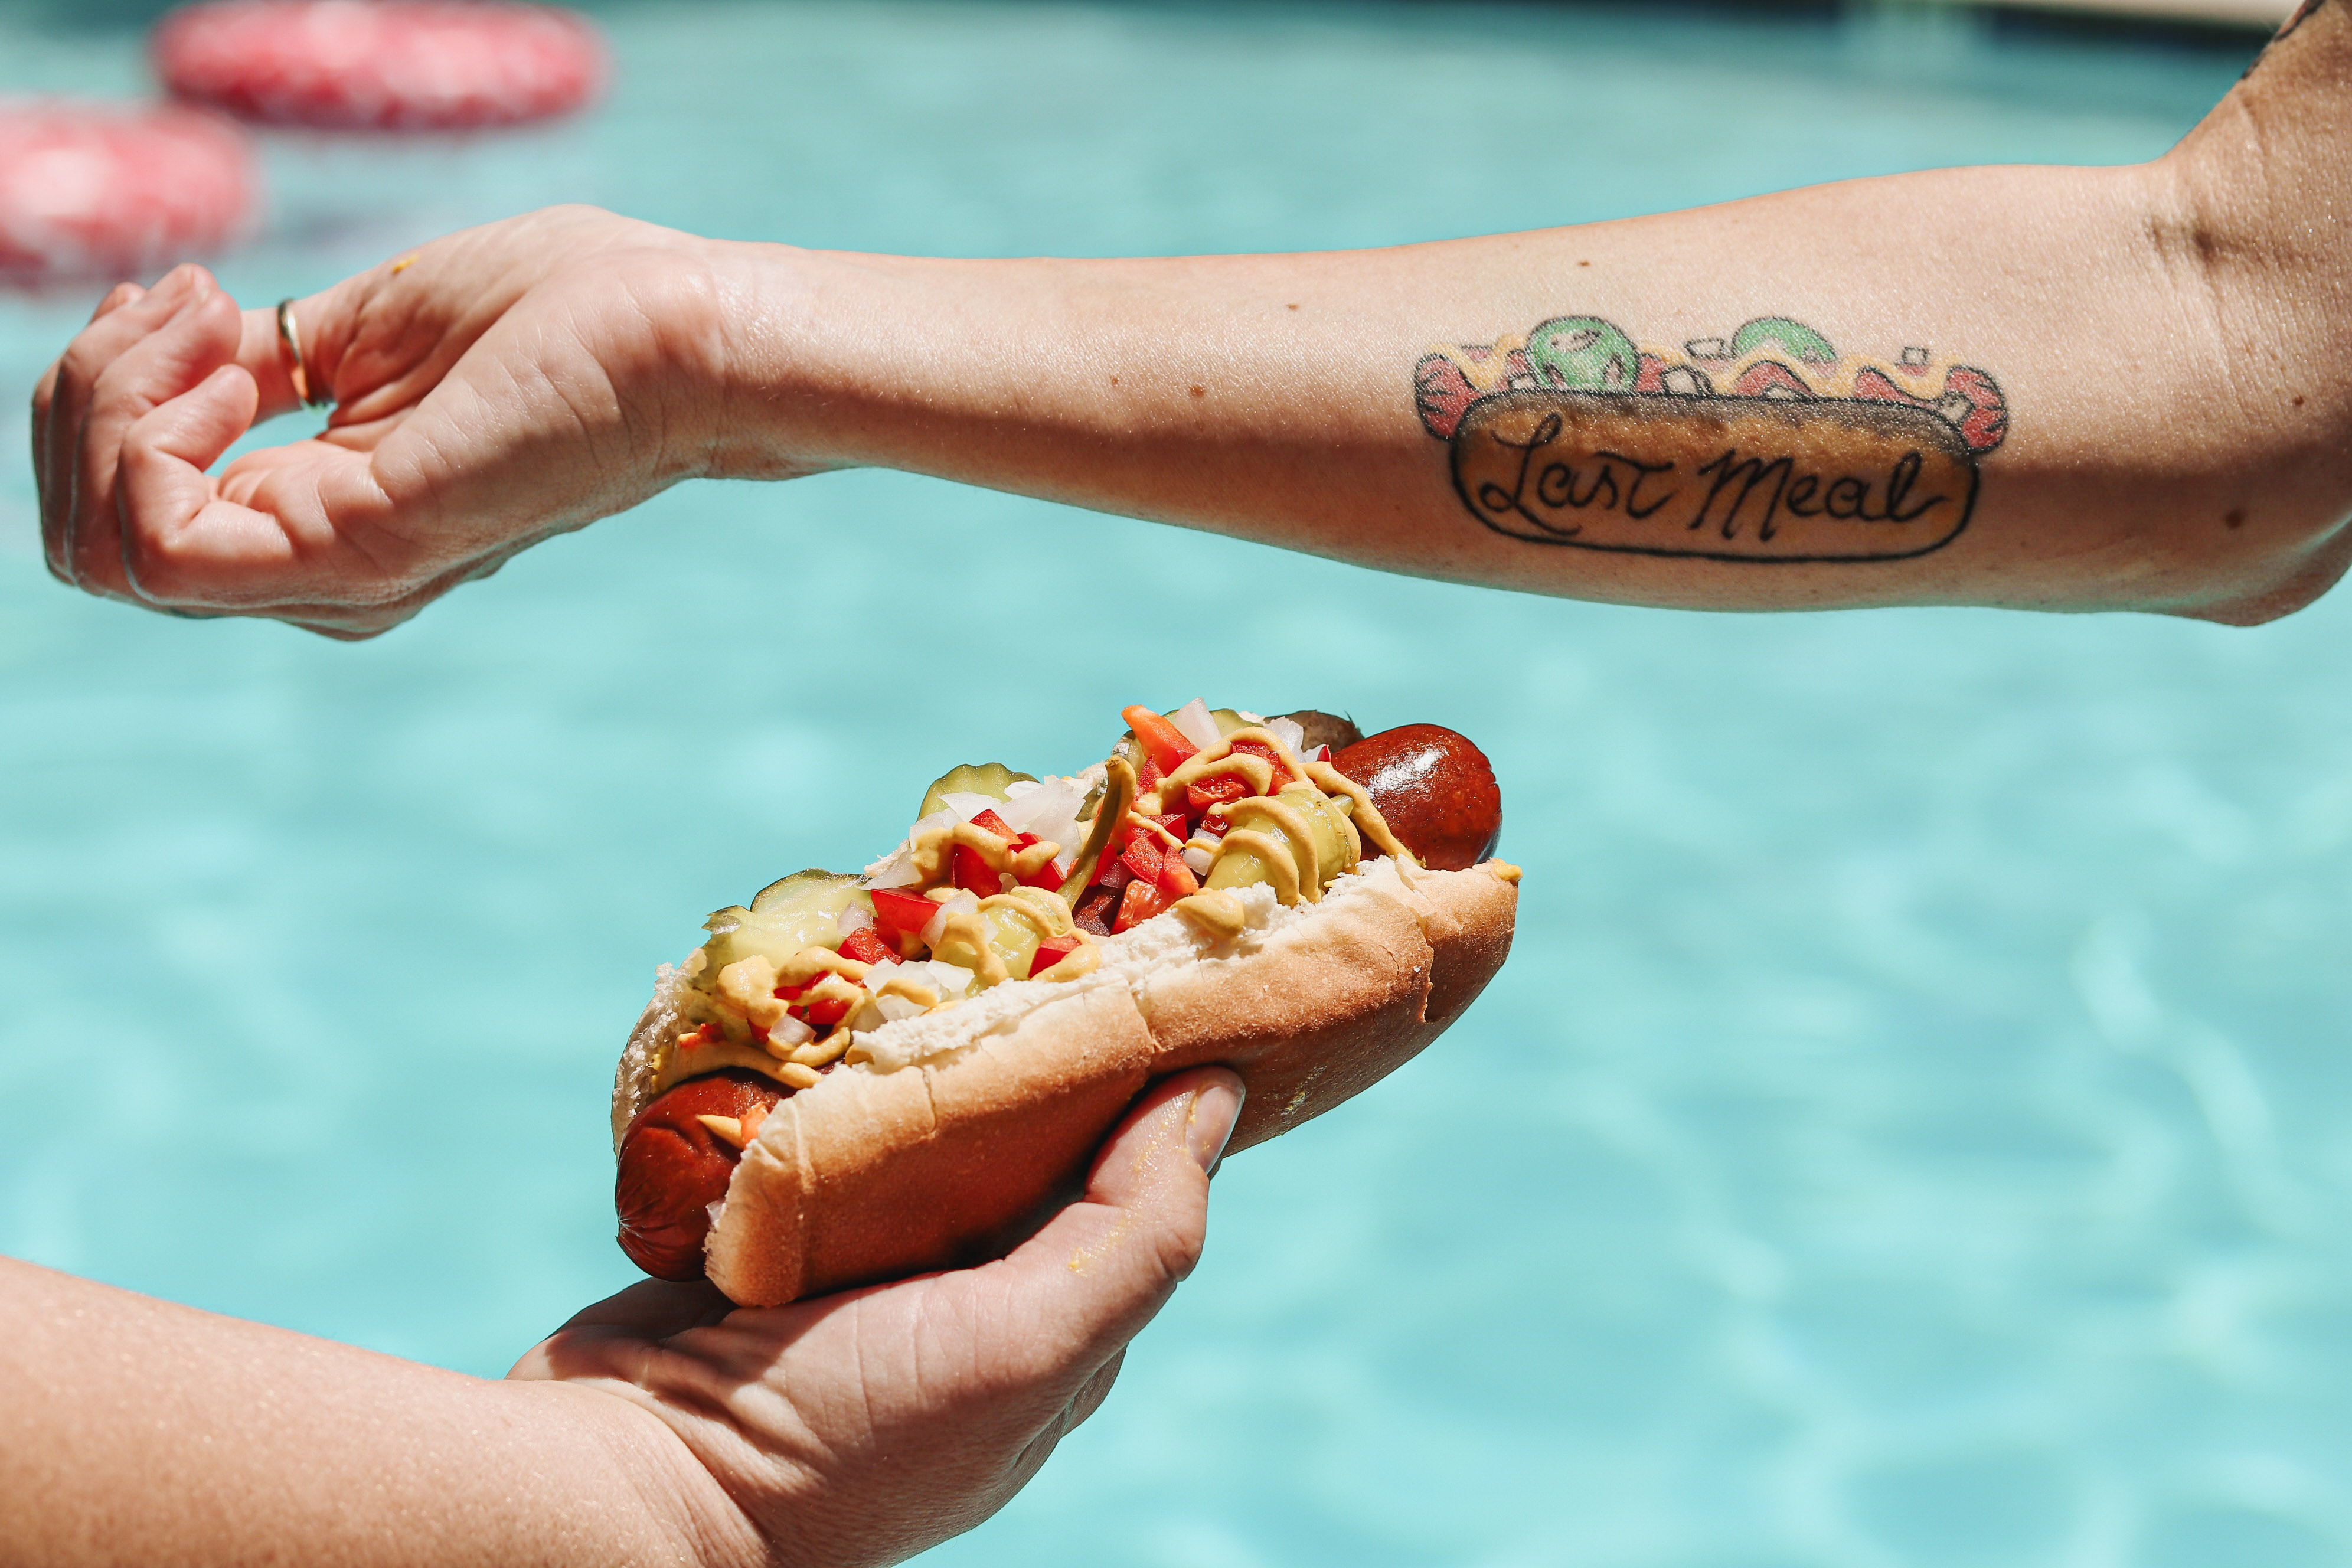 Someone holding up a hot dog next to another person’s arm tattoo